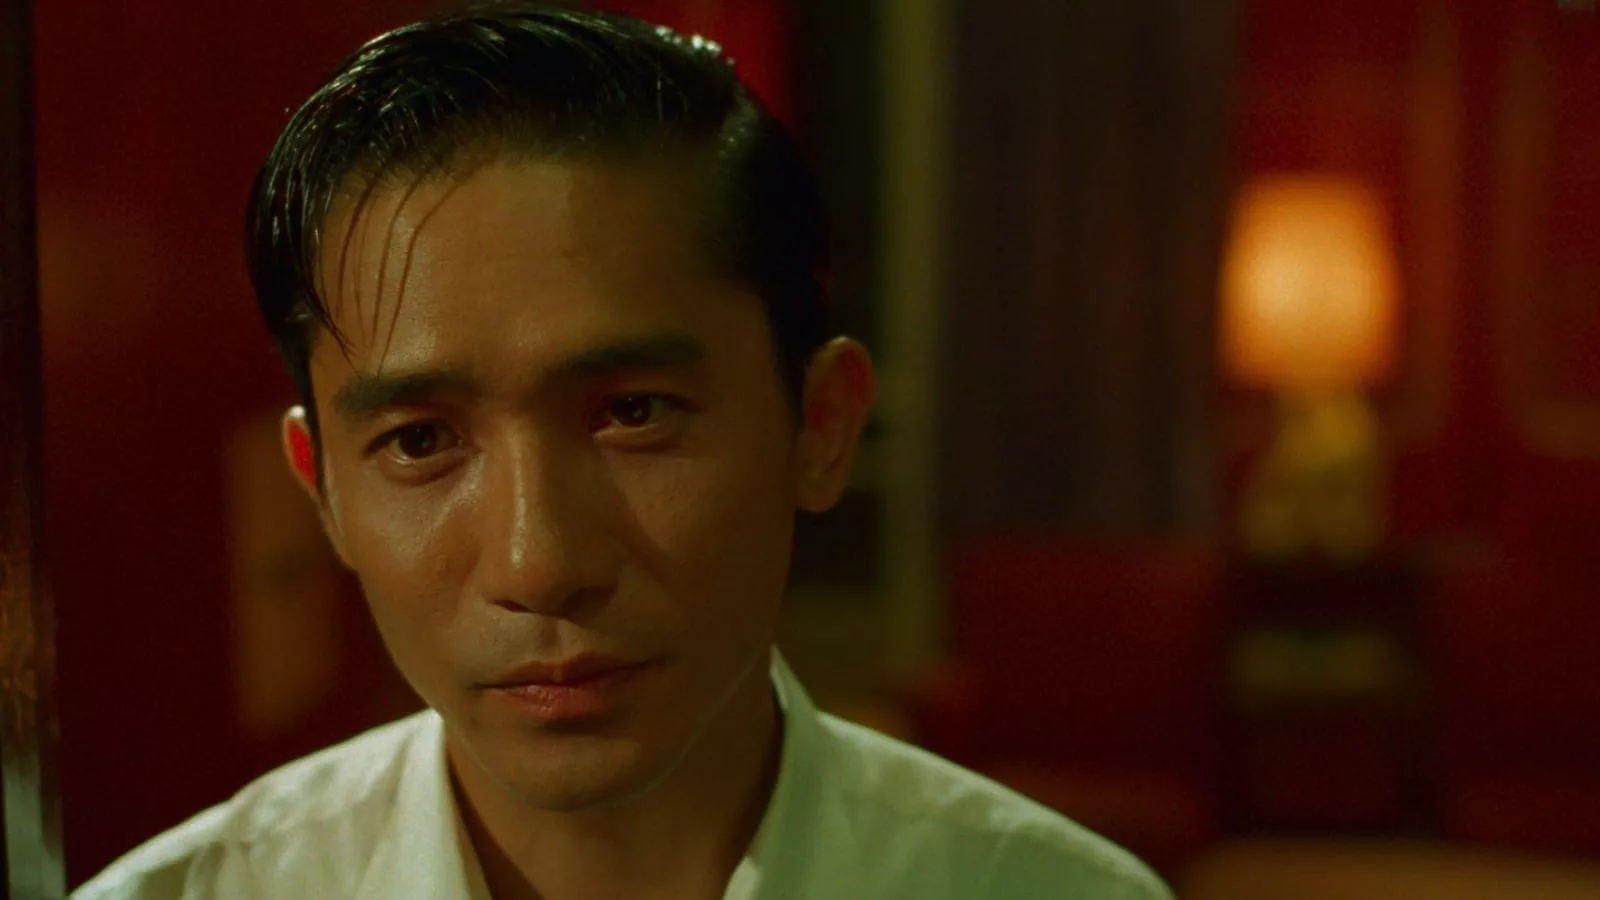 In Wong Kar Wai's In the Mood for Love drama, Chow Mo-wan (by Tony Leung Chiu-wai) dreaming about his neighbor as he is in the mood for love